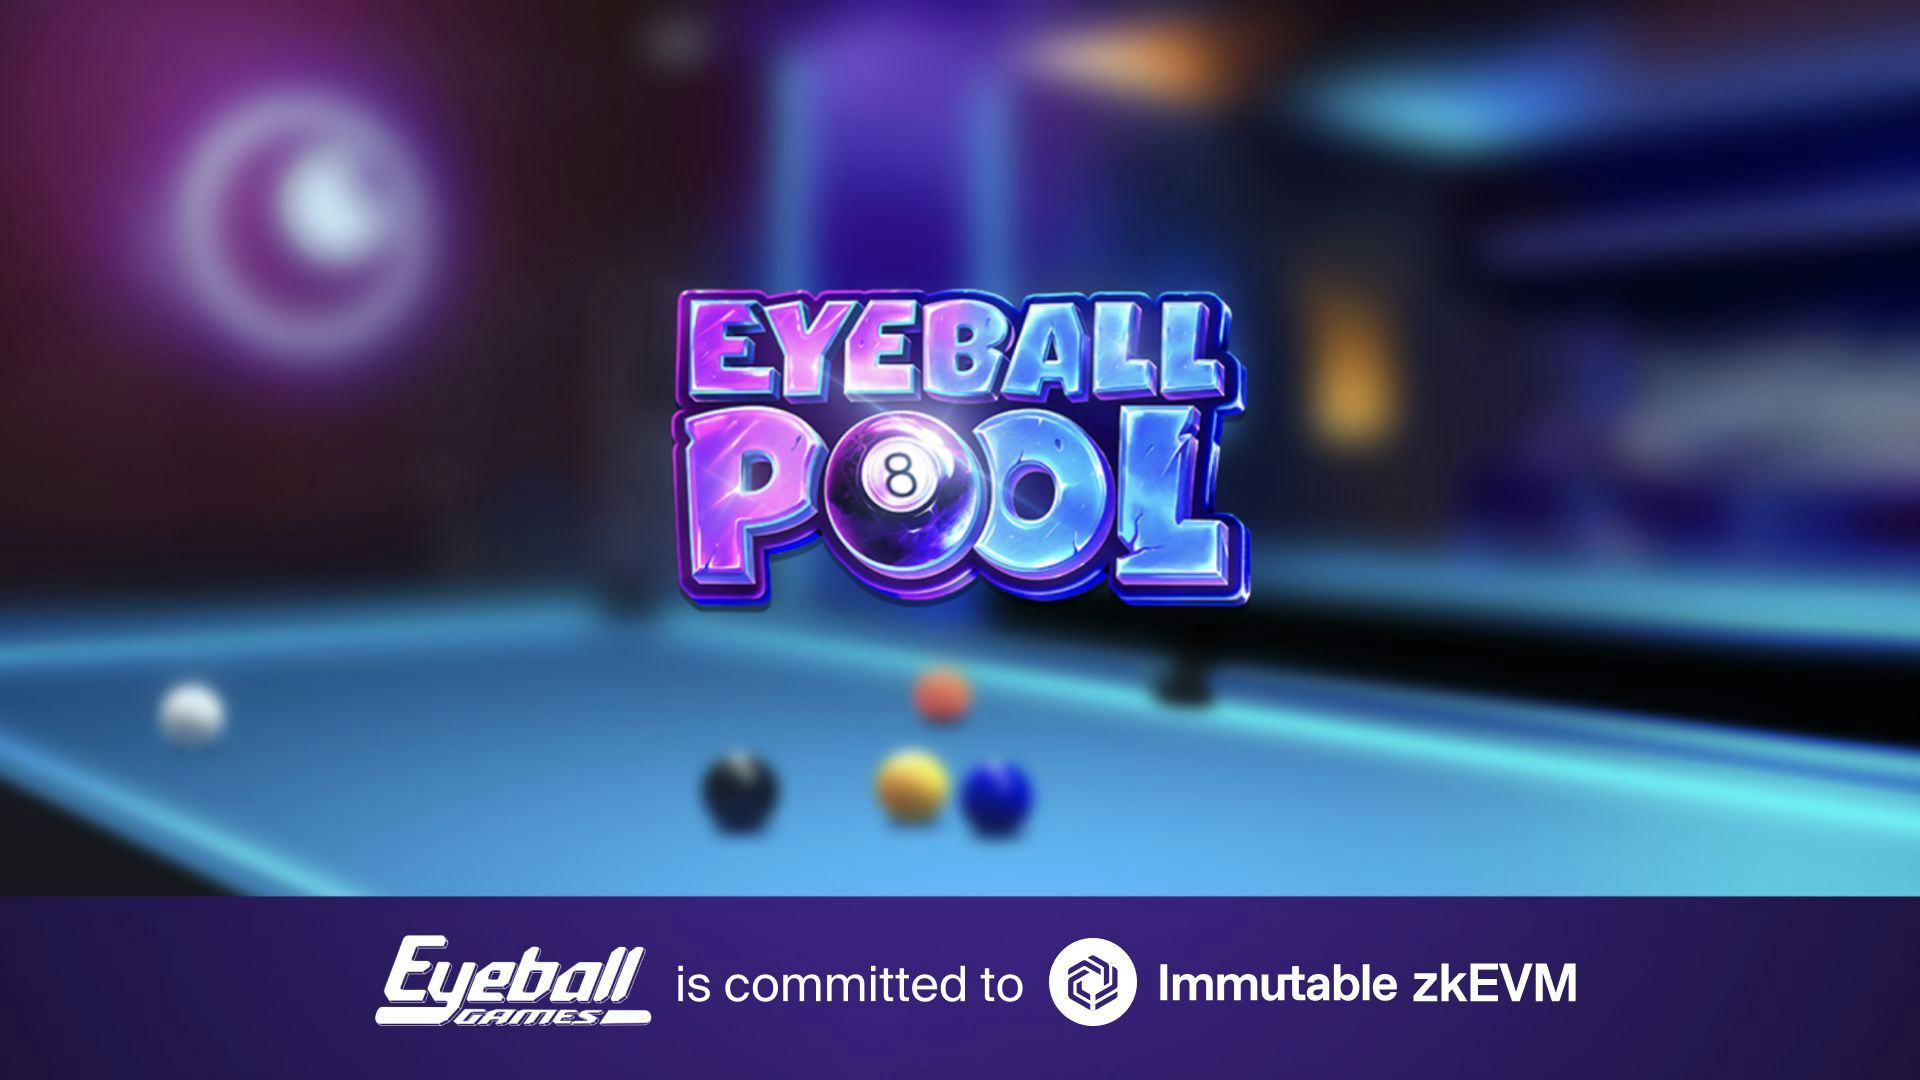 Eyeball Games to Bring 8 Ball Pool with Immutable zkEVM